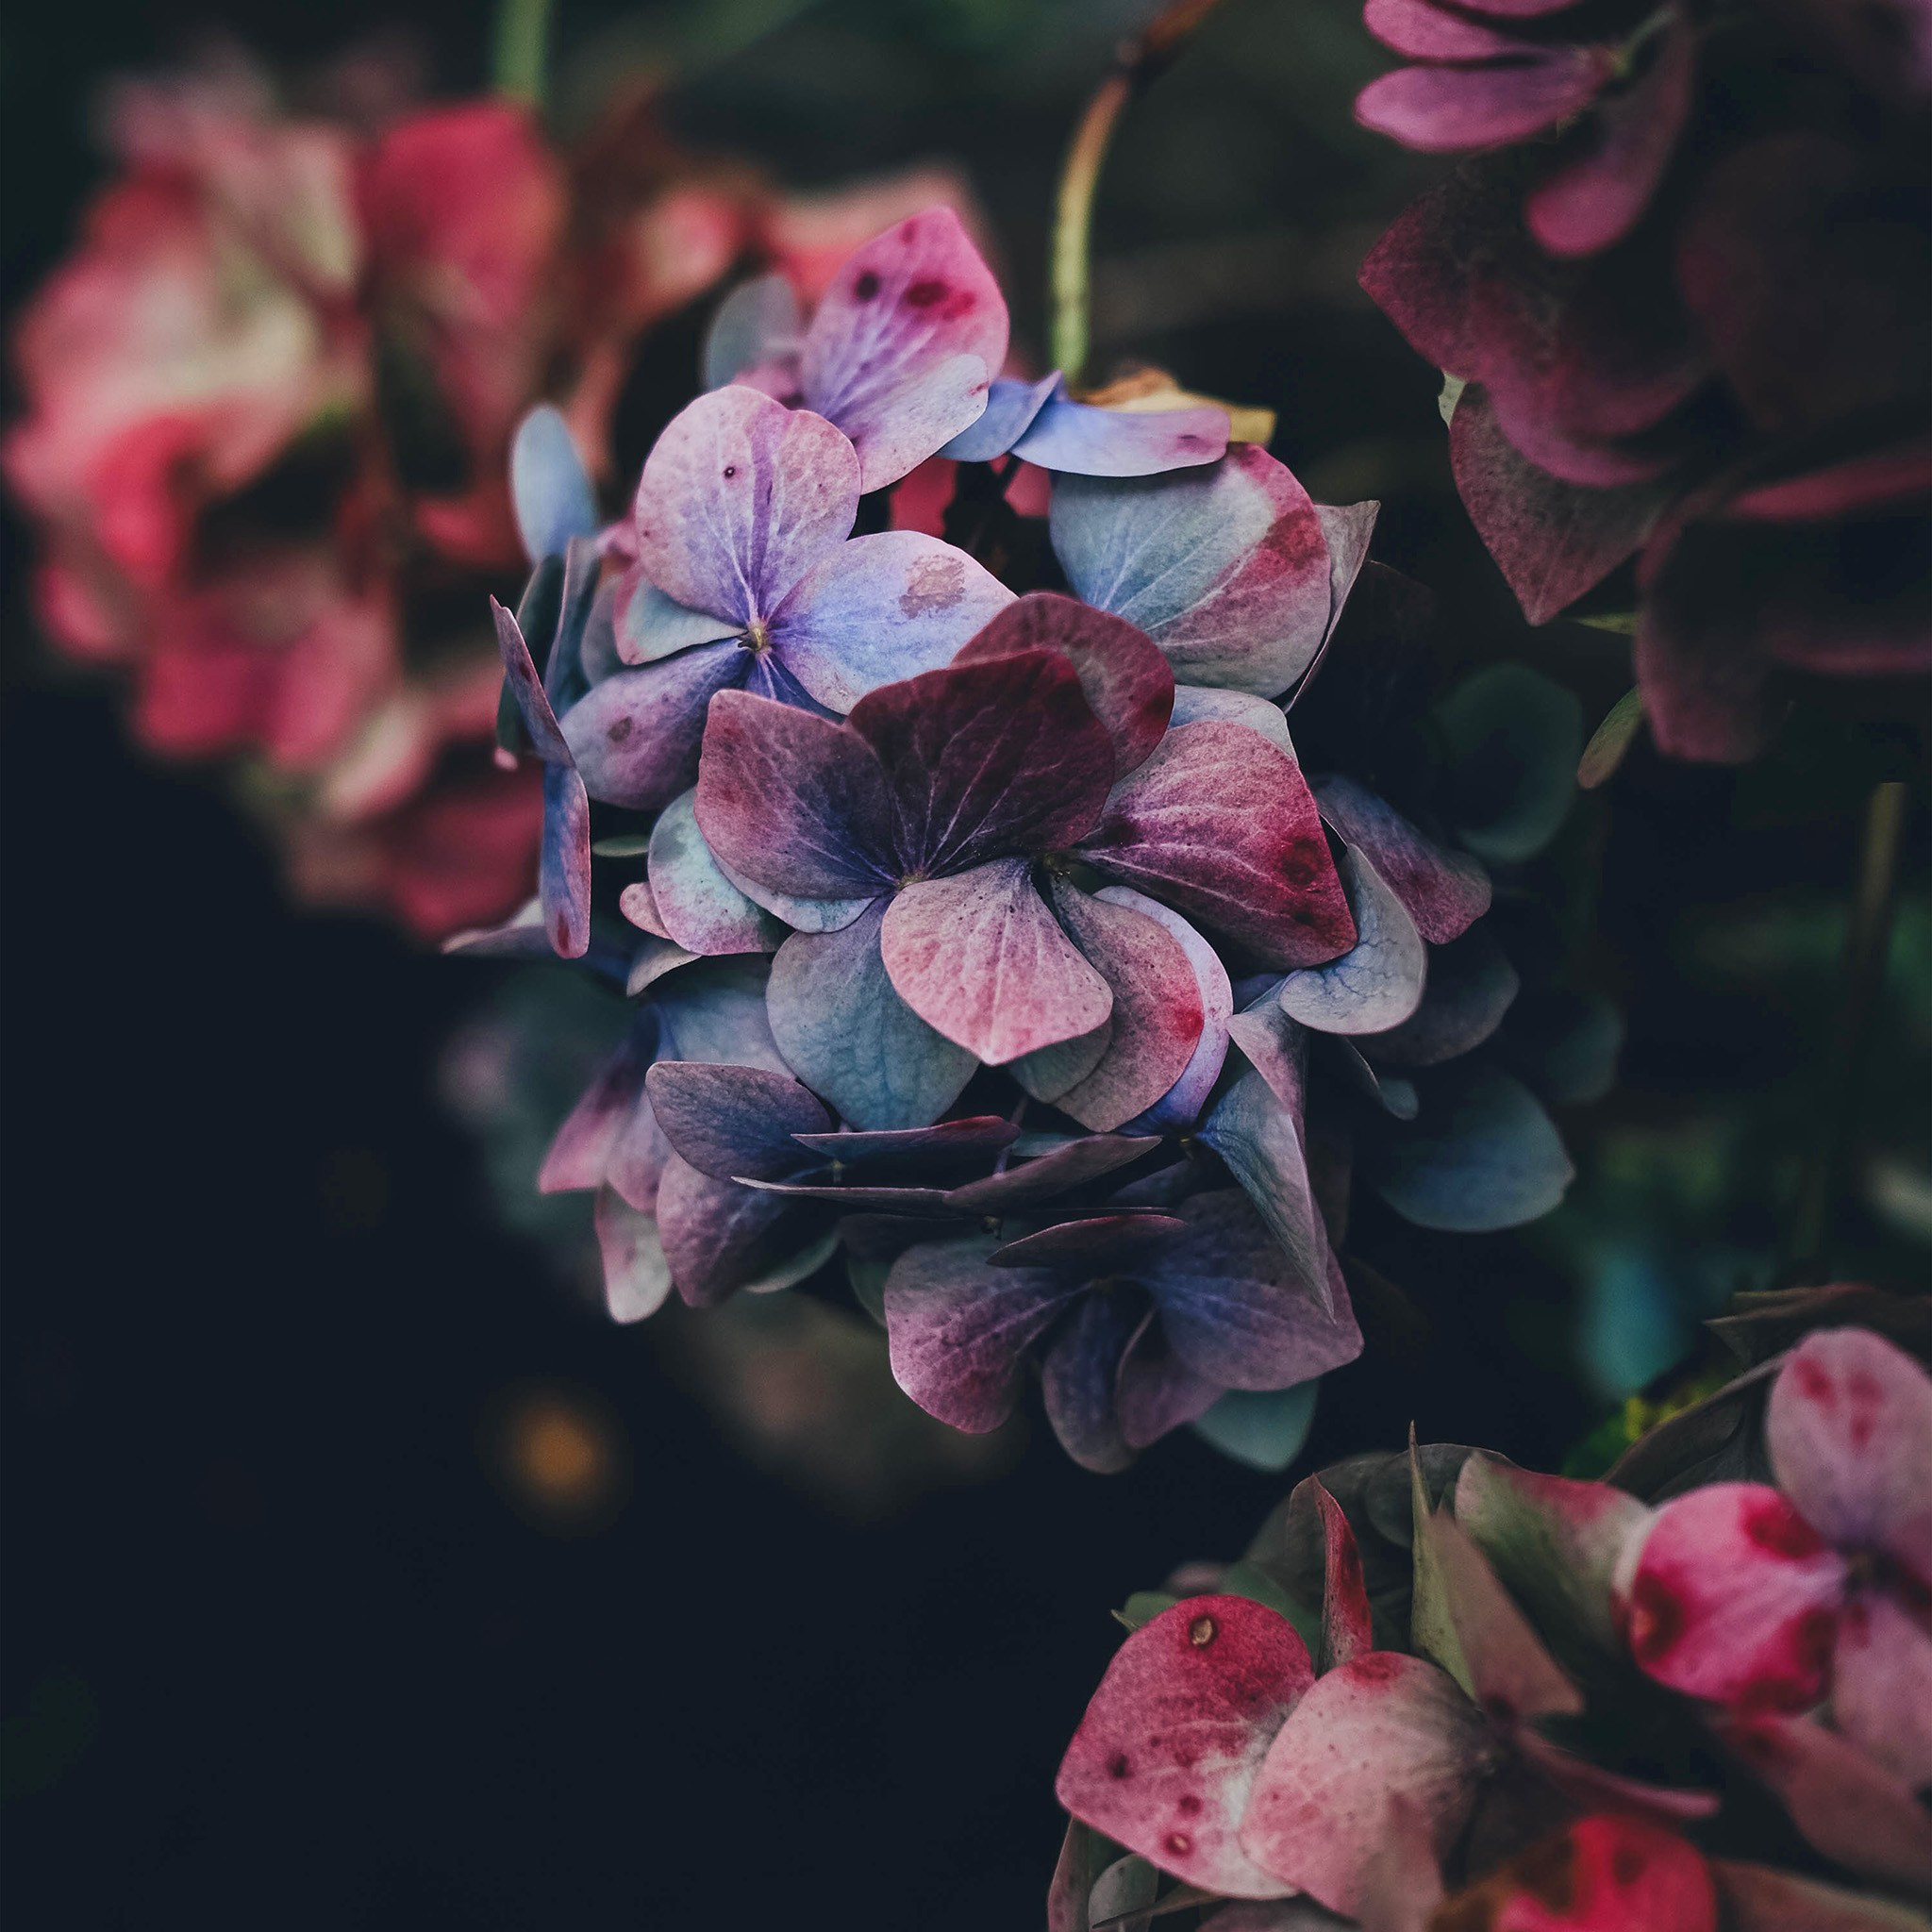 Dark Wallpapers For Android Flowers - HD Wallpaper 